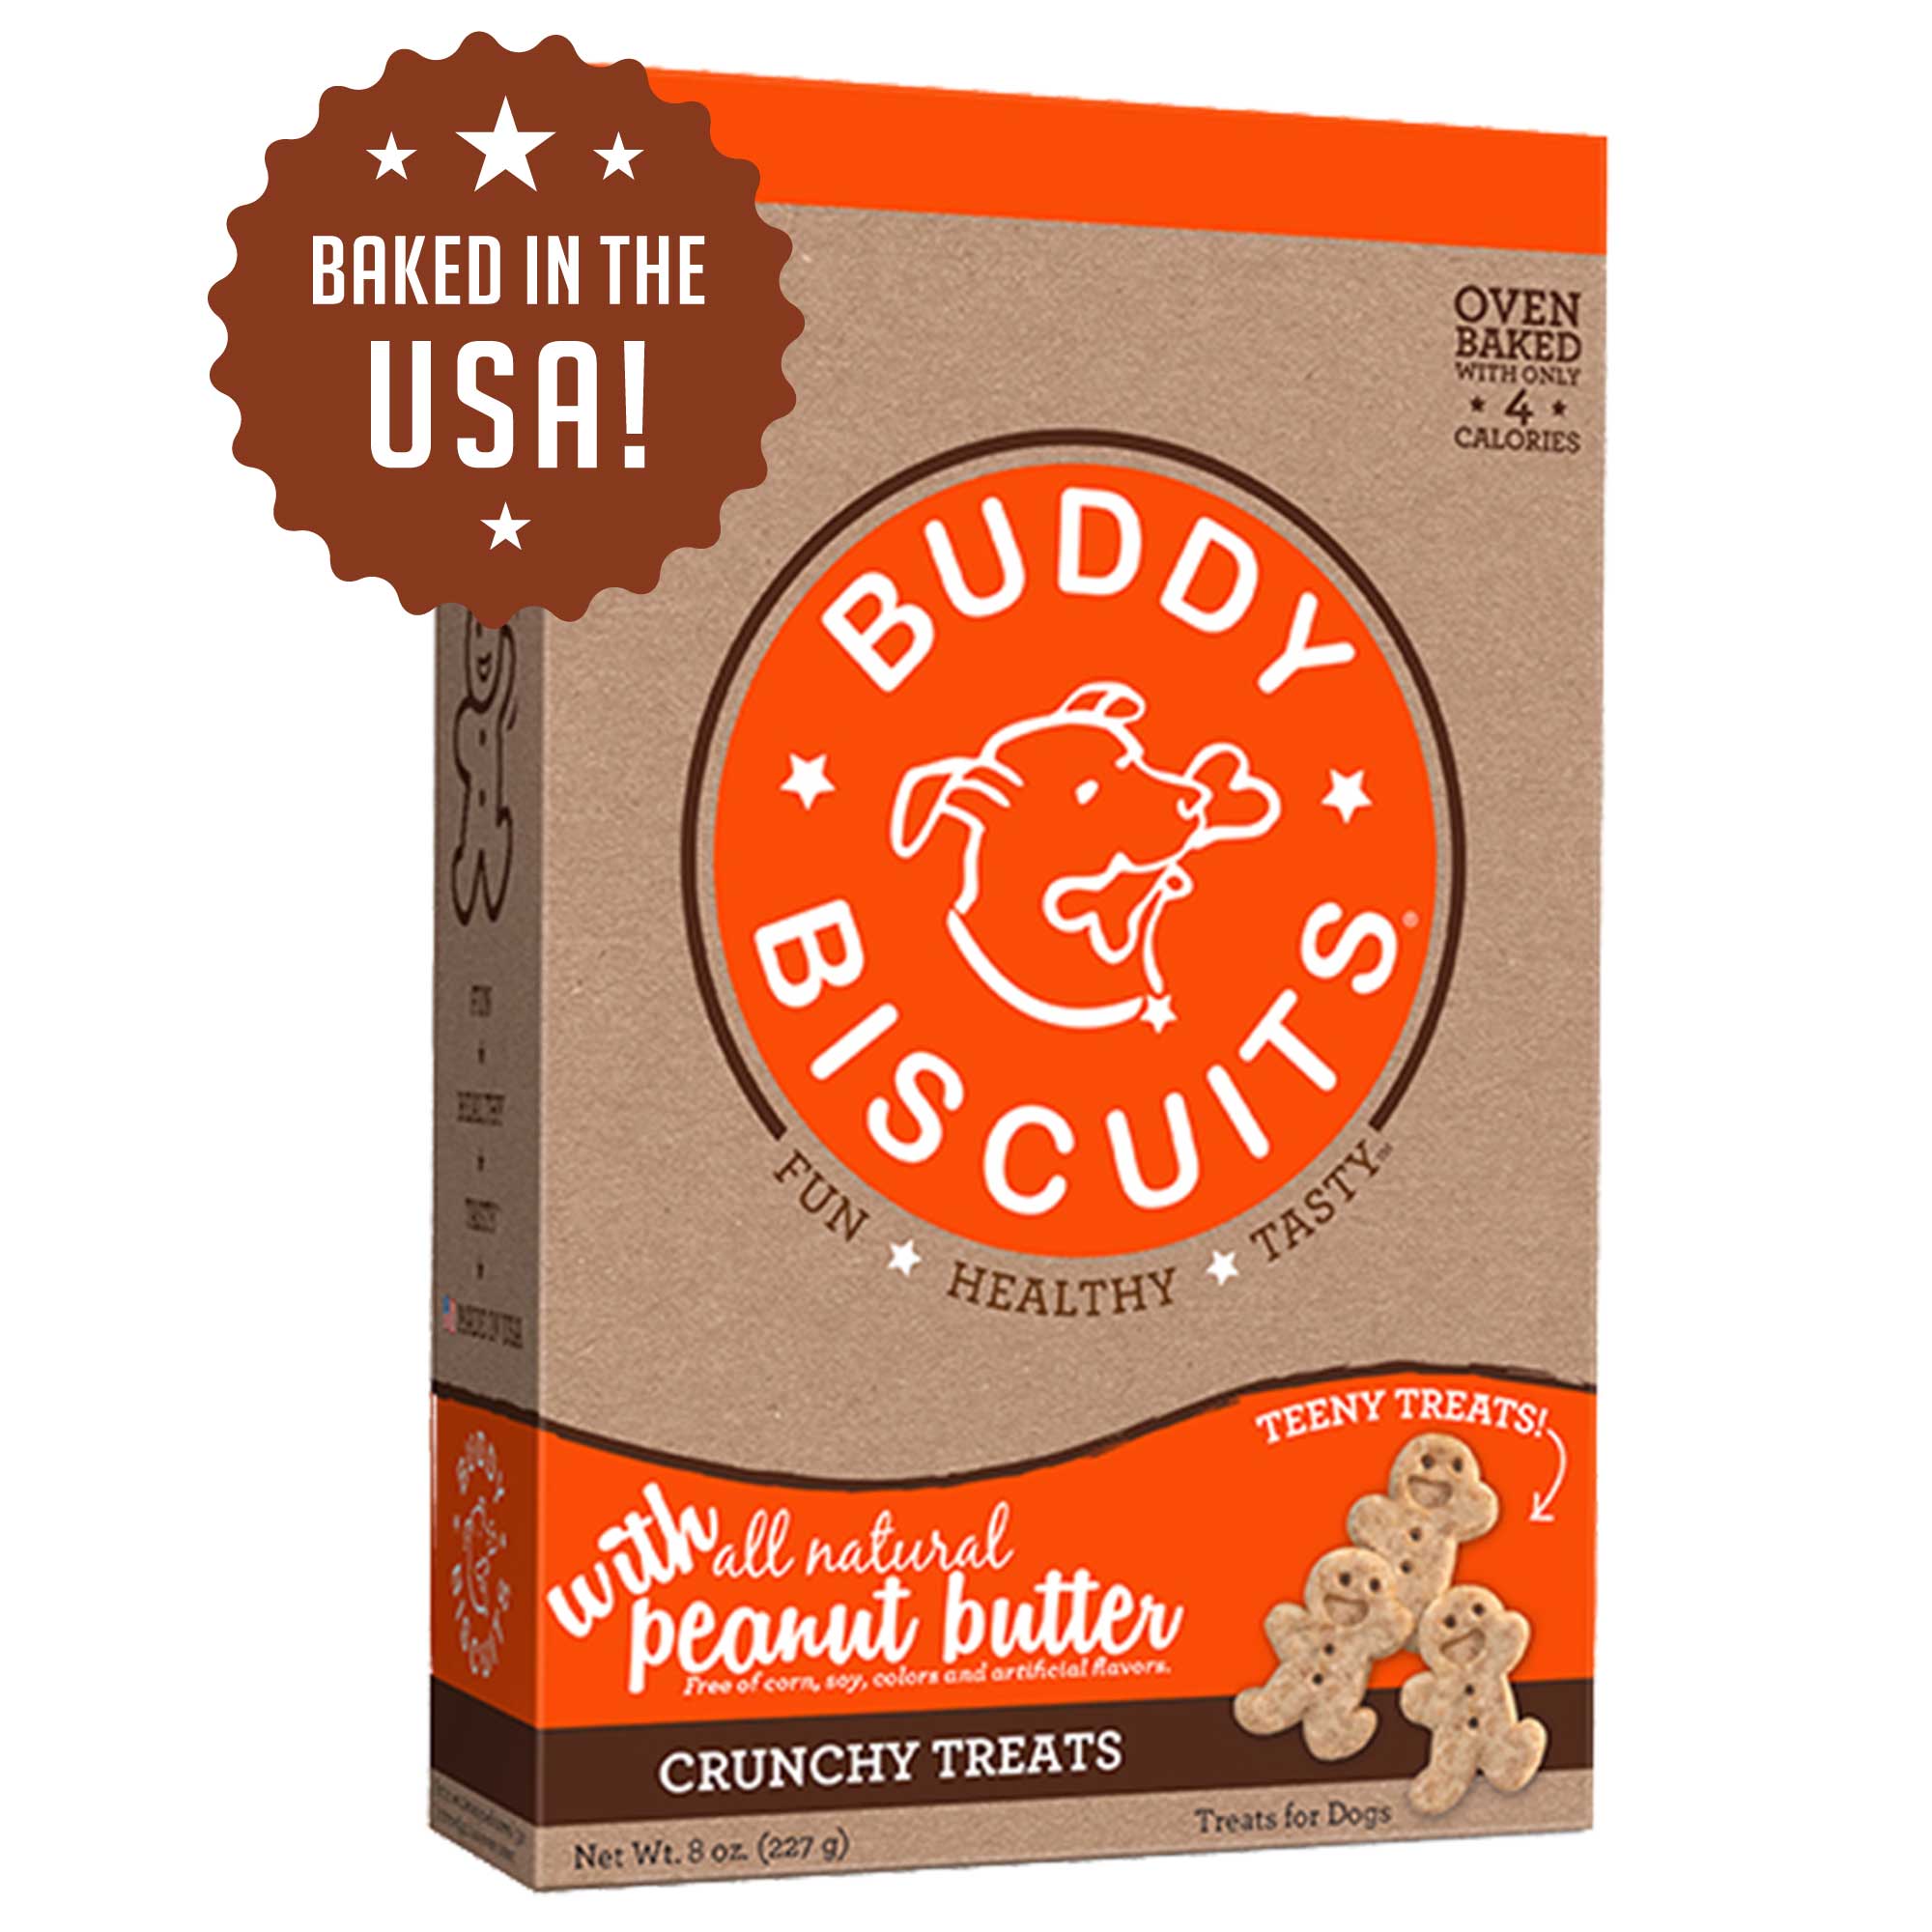 Buddy Biscuits TEENY Oven-Baked Whole Grain Crunchy Dog Treats with Peanut Butter - Made in the USA - 8 oz. - image 1 of 2